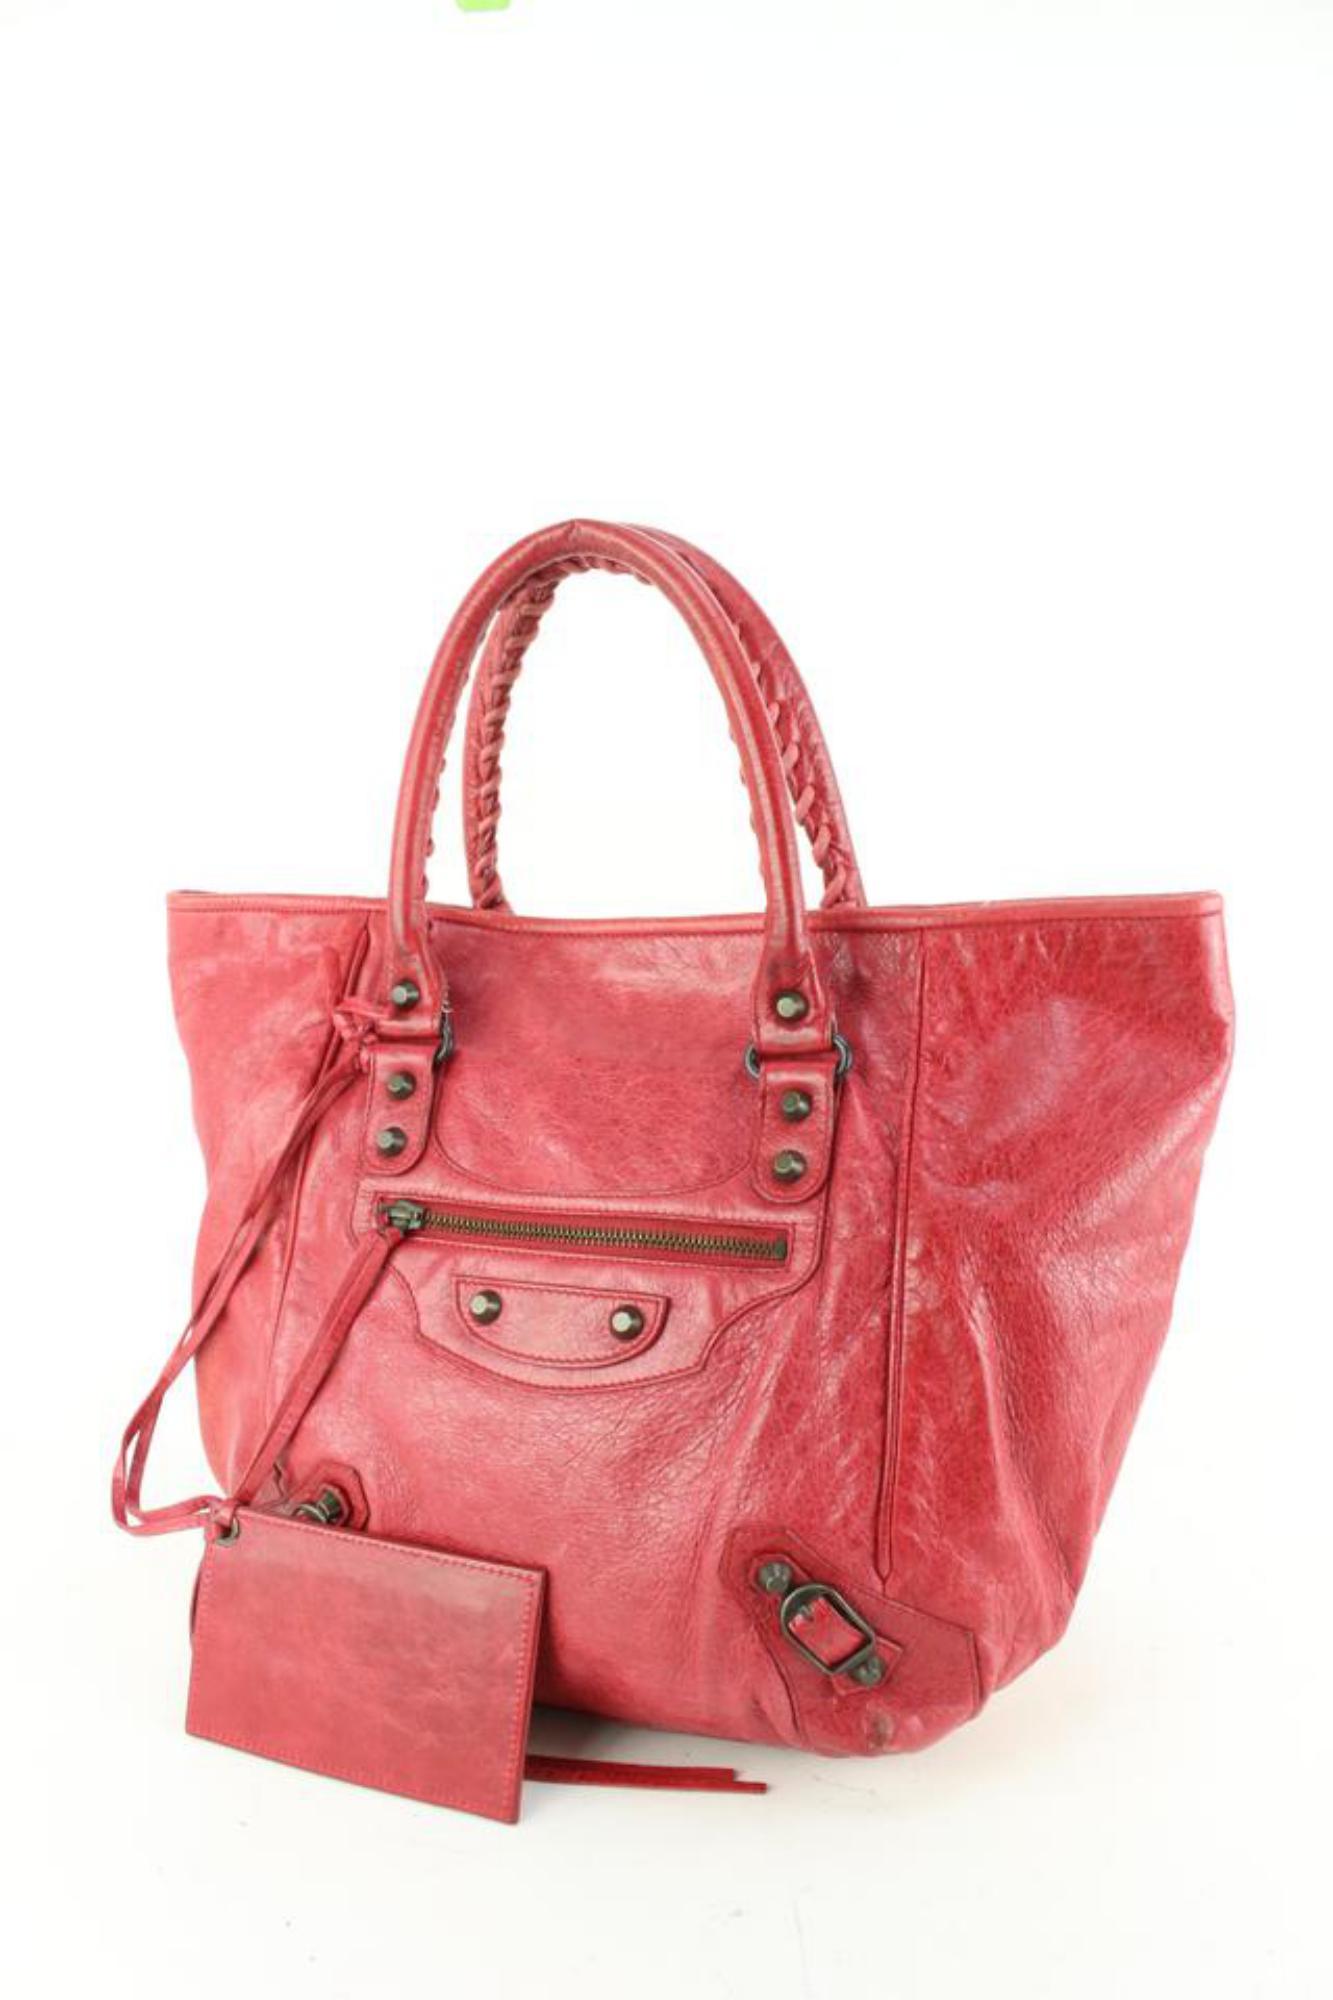 Balenciaga Red Sang Lambskin Leather S Sunday Tote 98ba52s For Sale 5